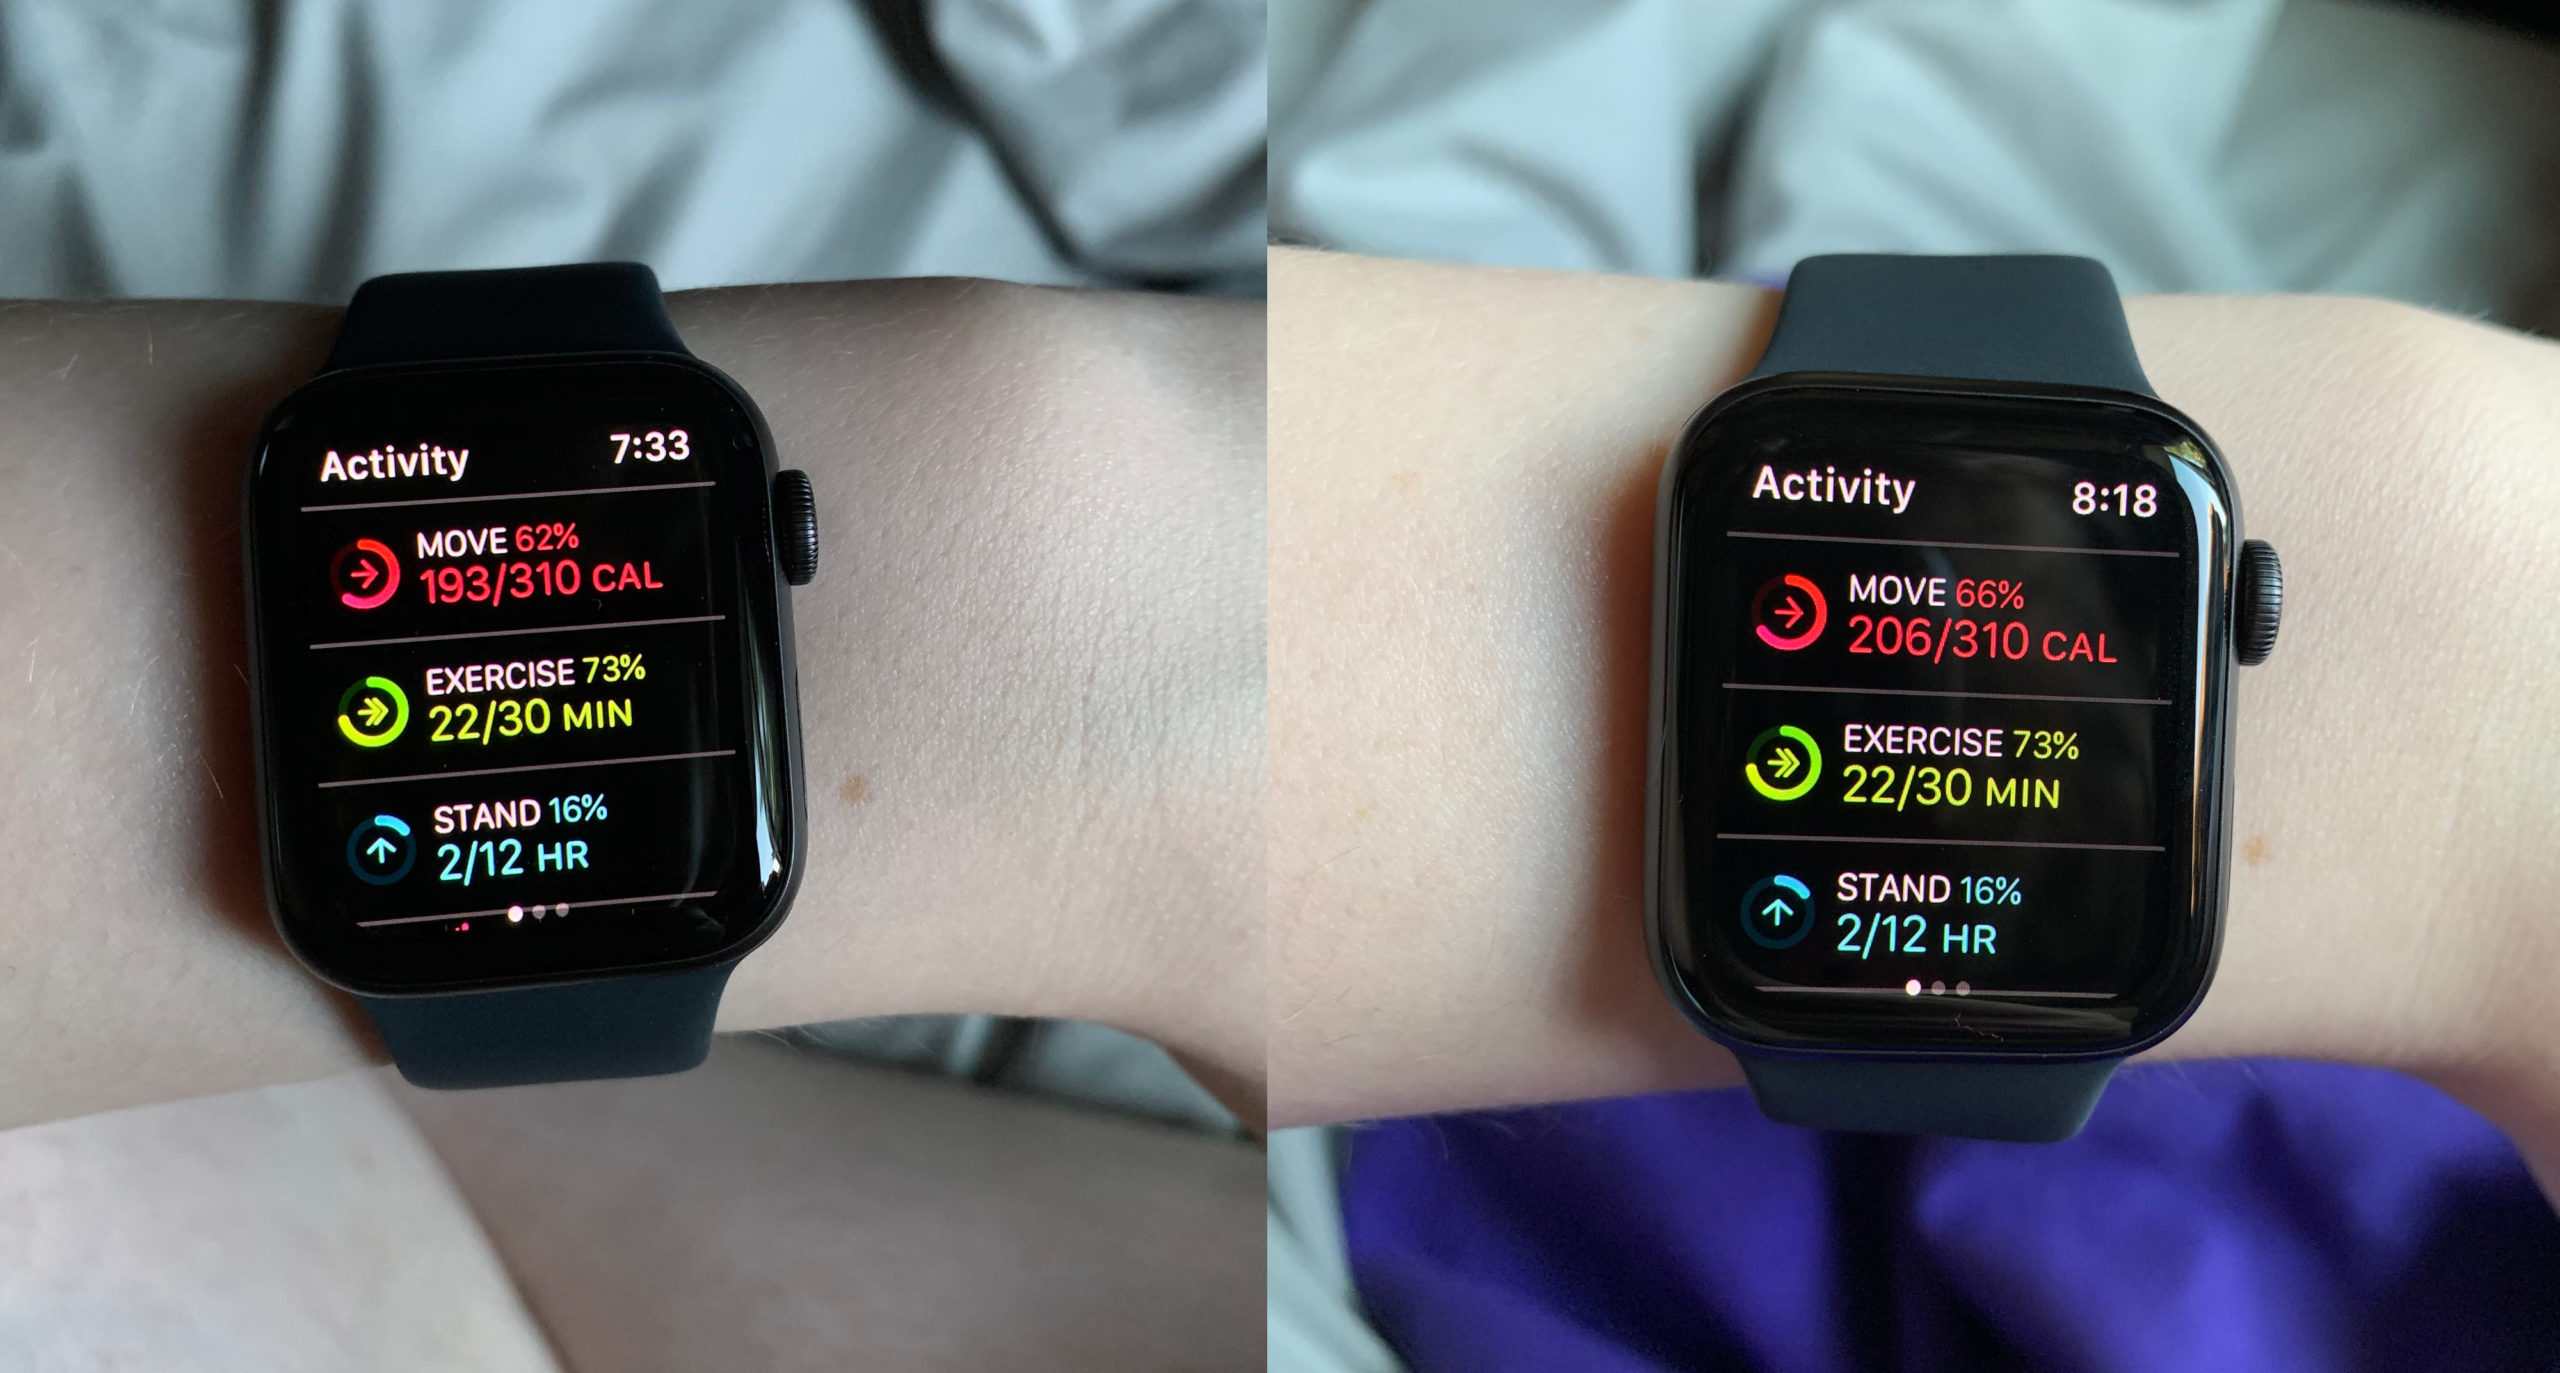 Privacy Rights Apple Watch Tracks Activity During image image